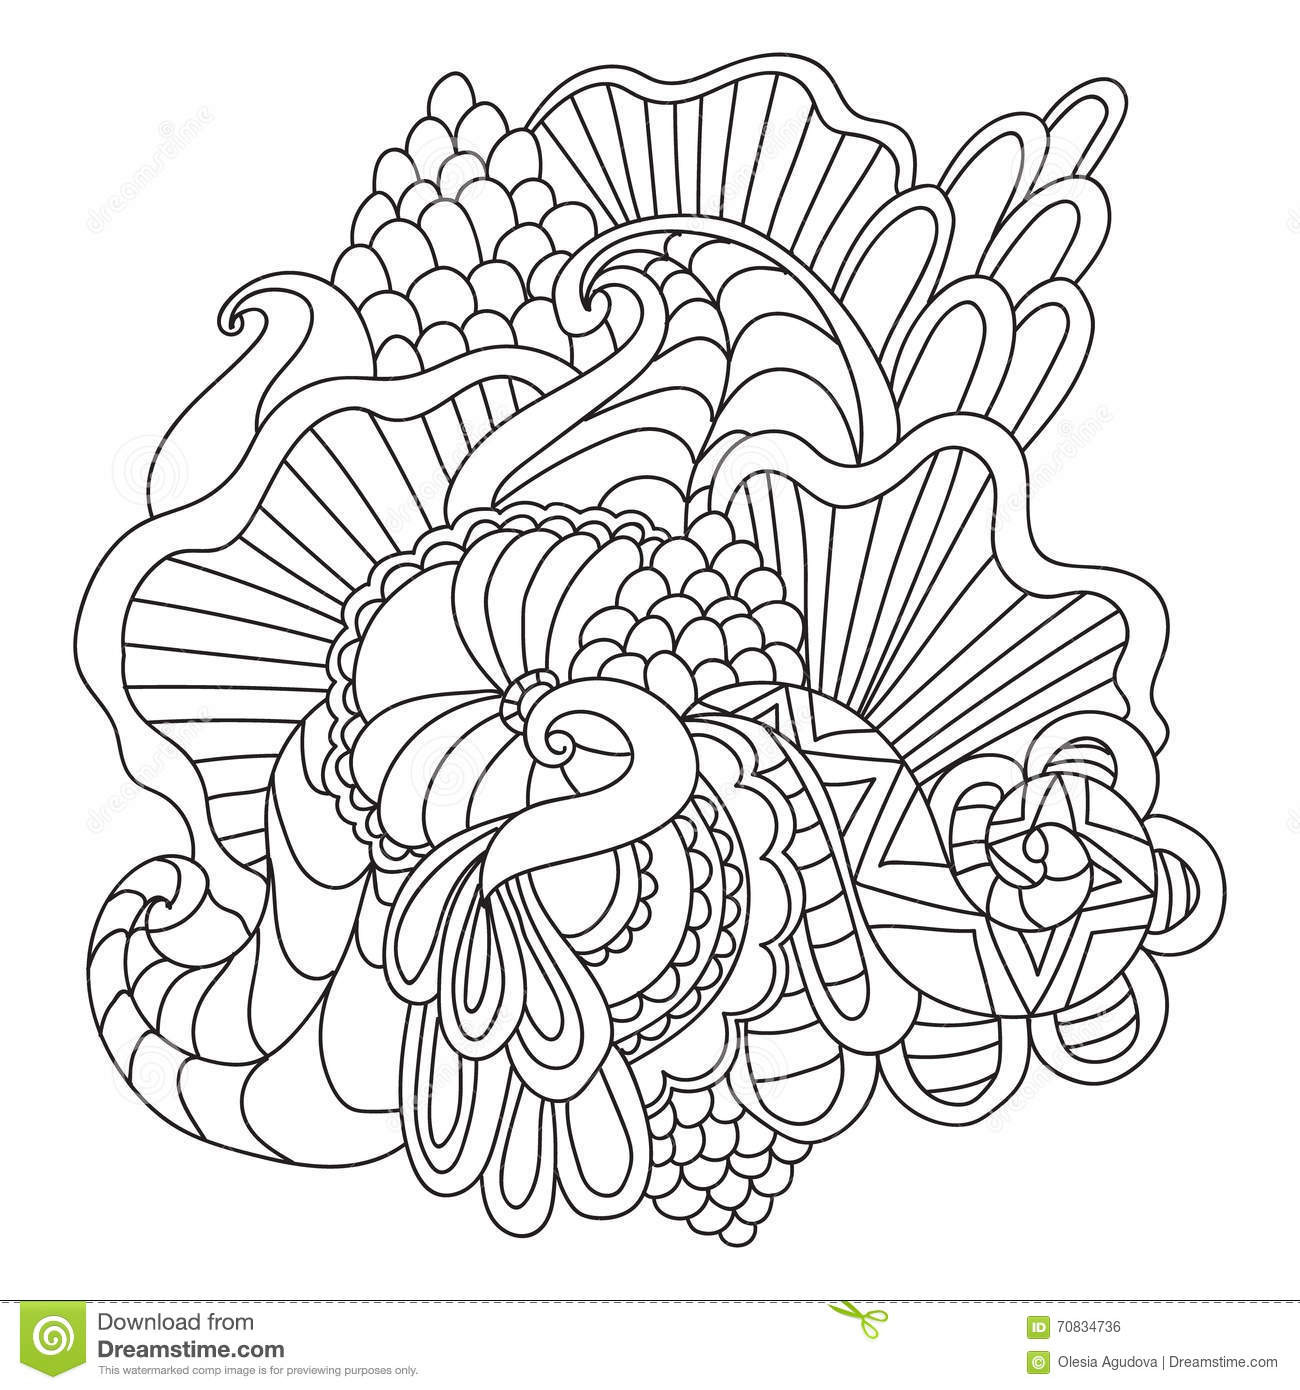 Hand Drawn Coloring Pages
 Coloring Pages For Adults Decorative Hand Drawn Doodle